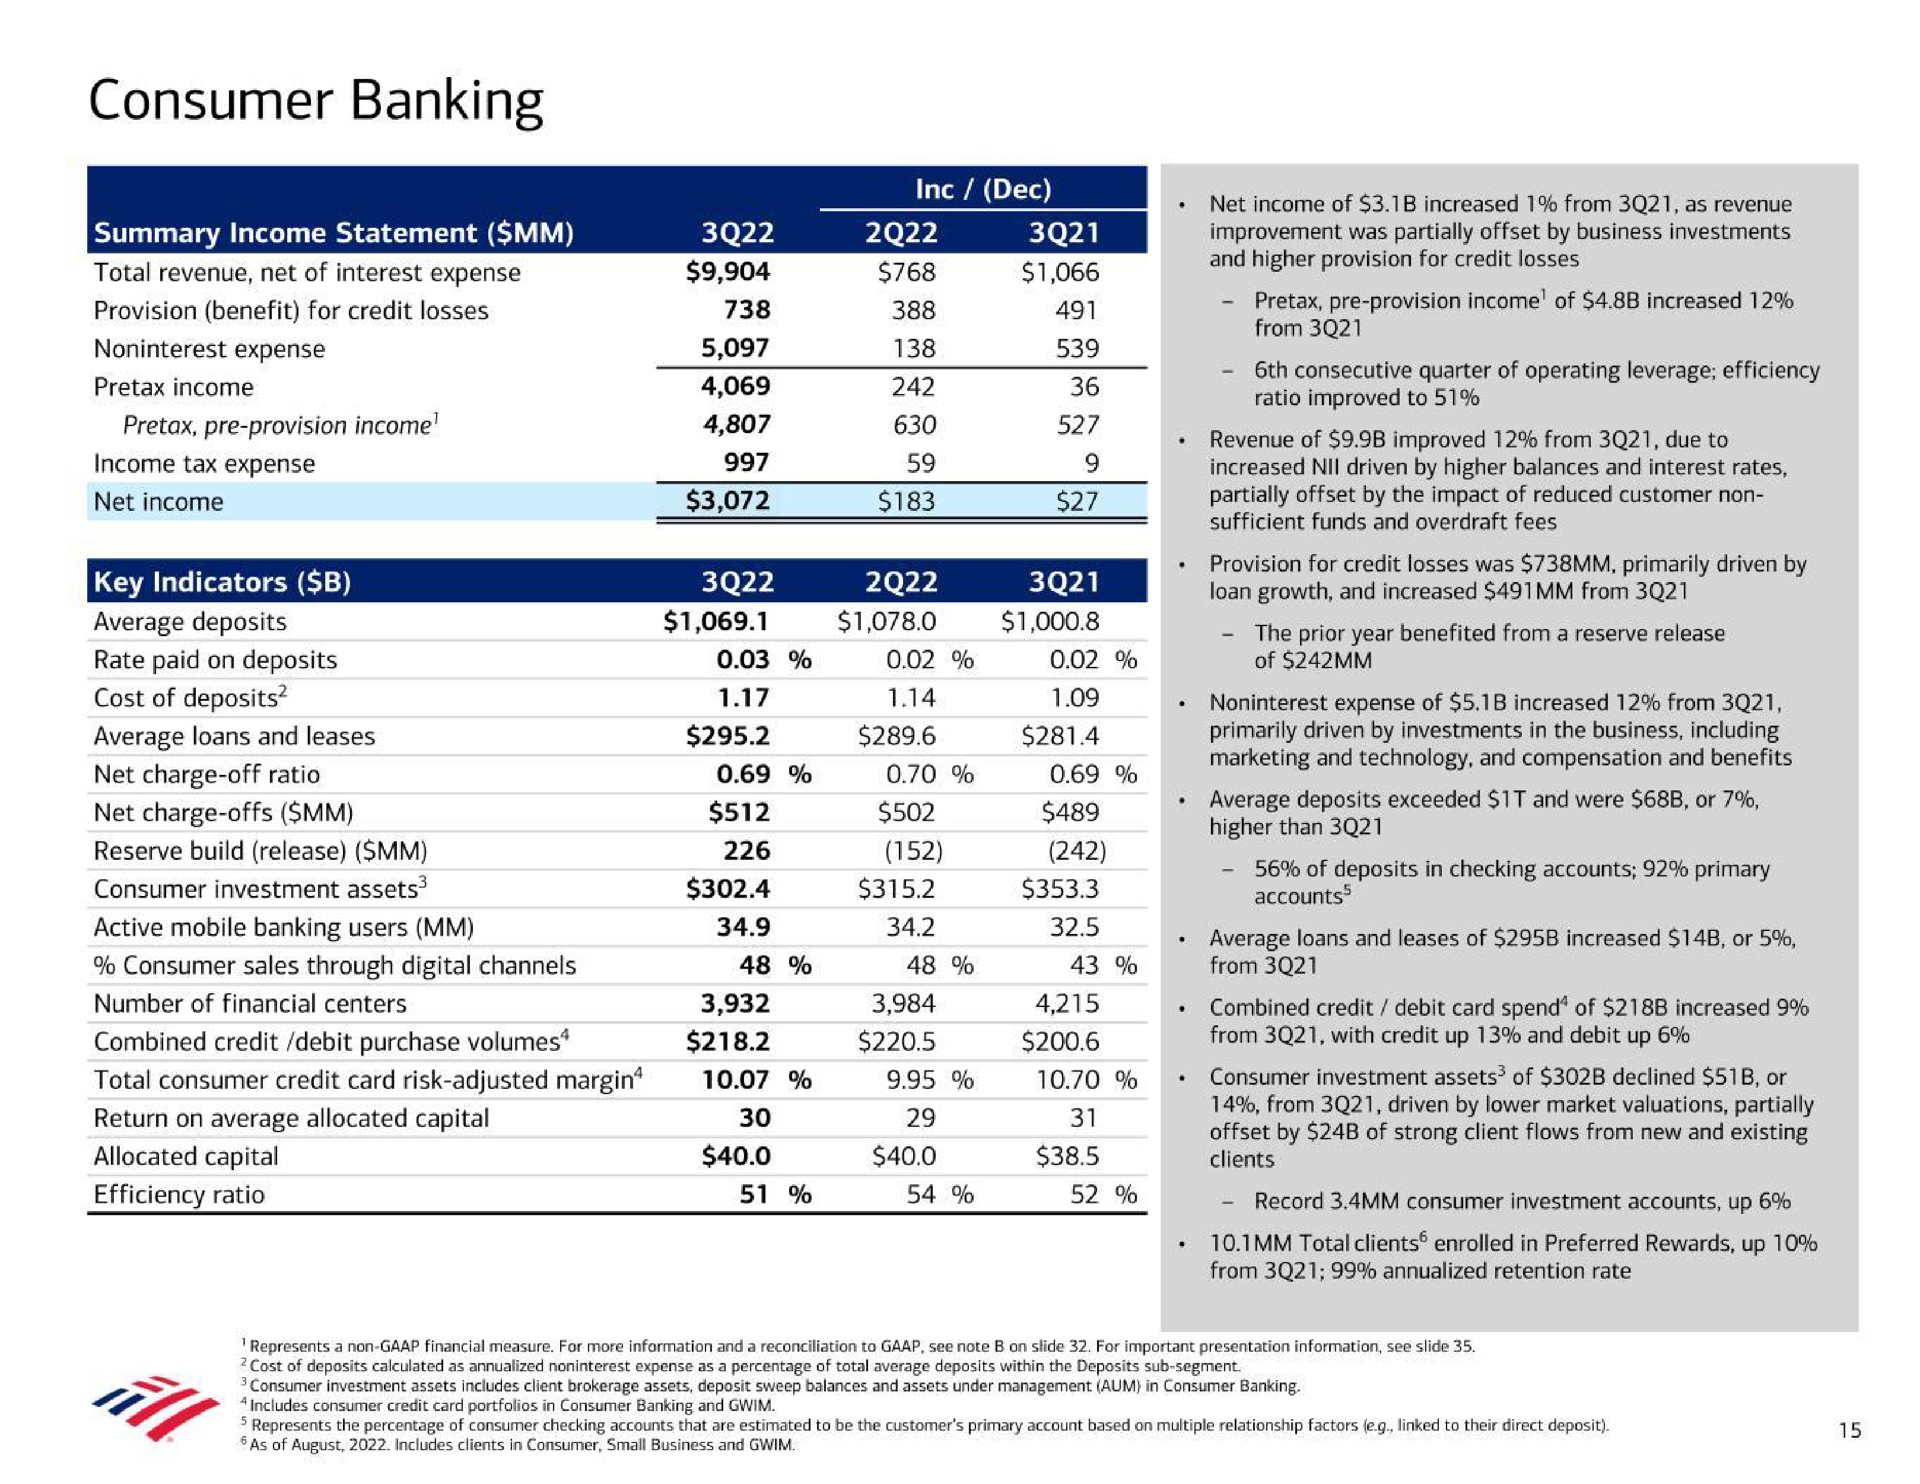 consumer banking provision benefit for credit losses net charge offs a combined credit debit purchase volumes allocated capital a income of increased sar from with credit up and debit up clients | Bank of America